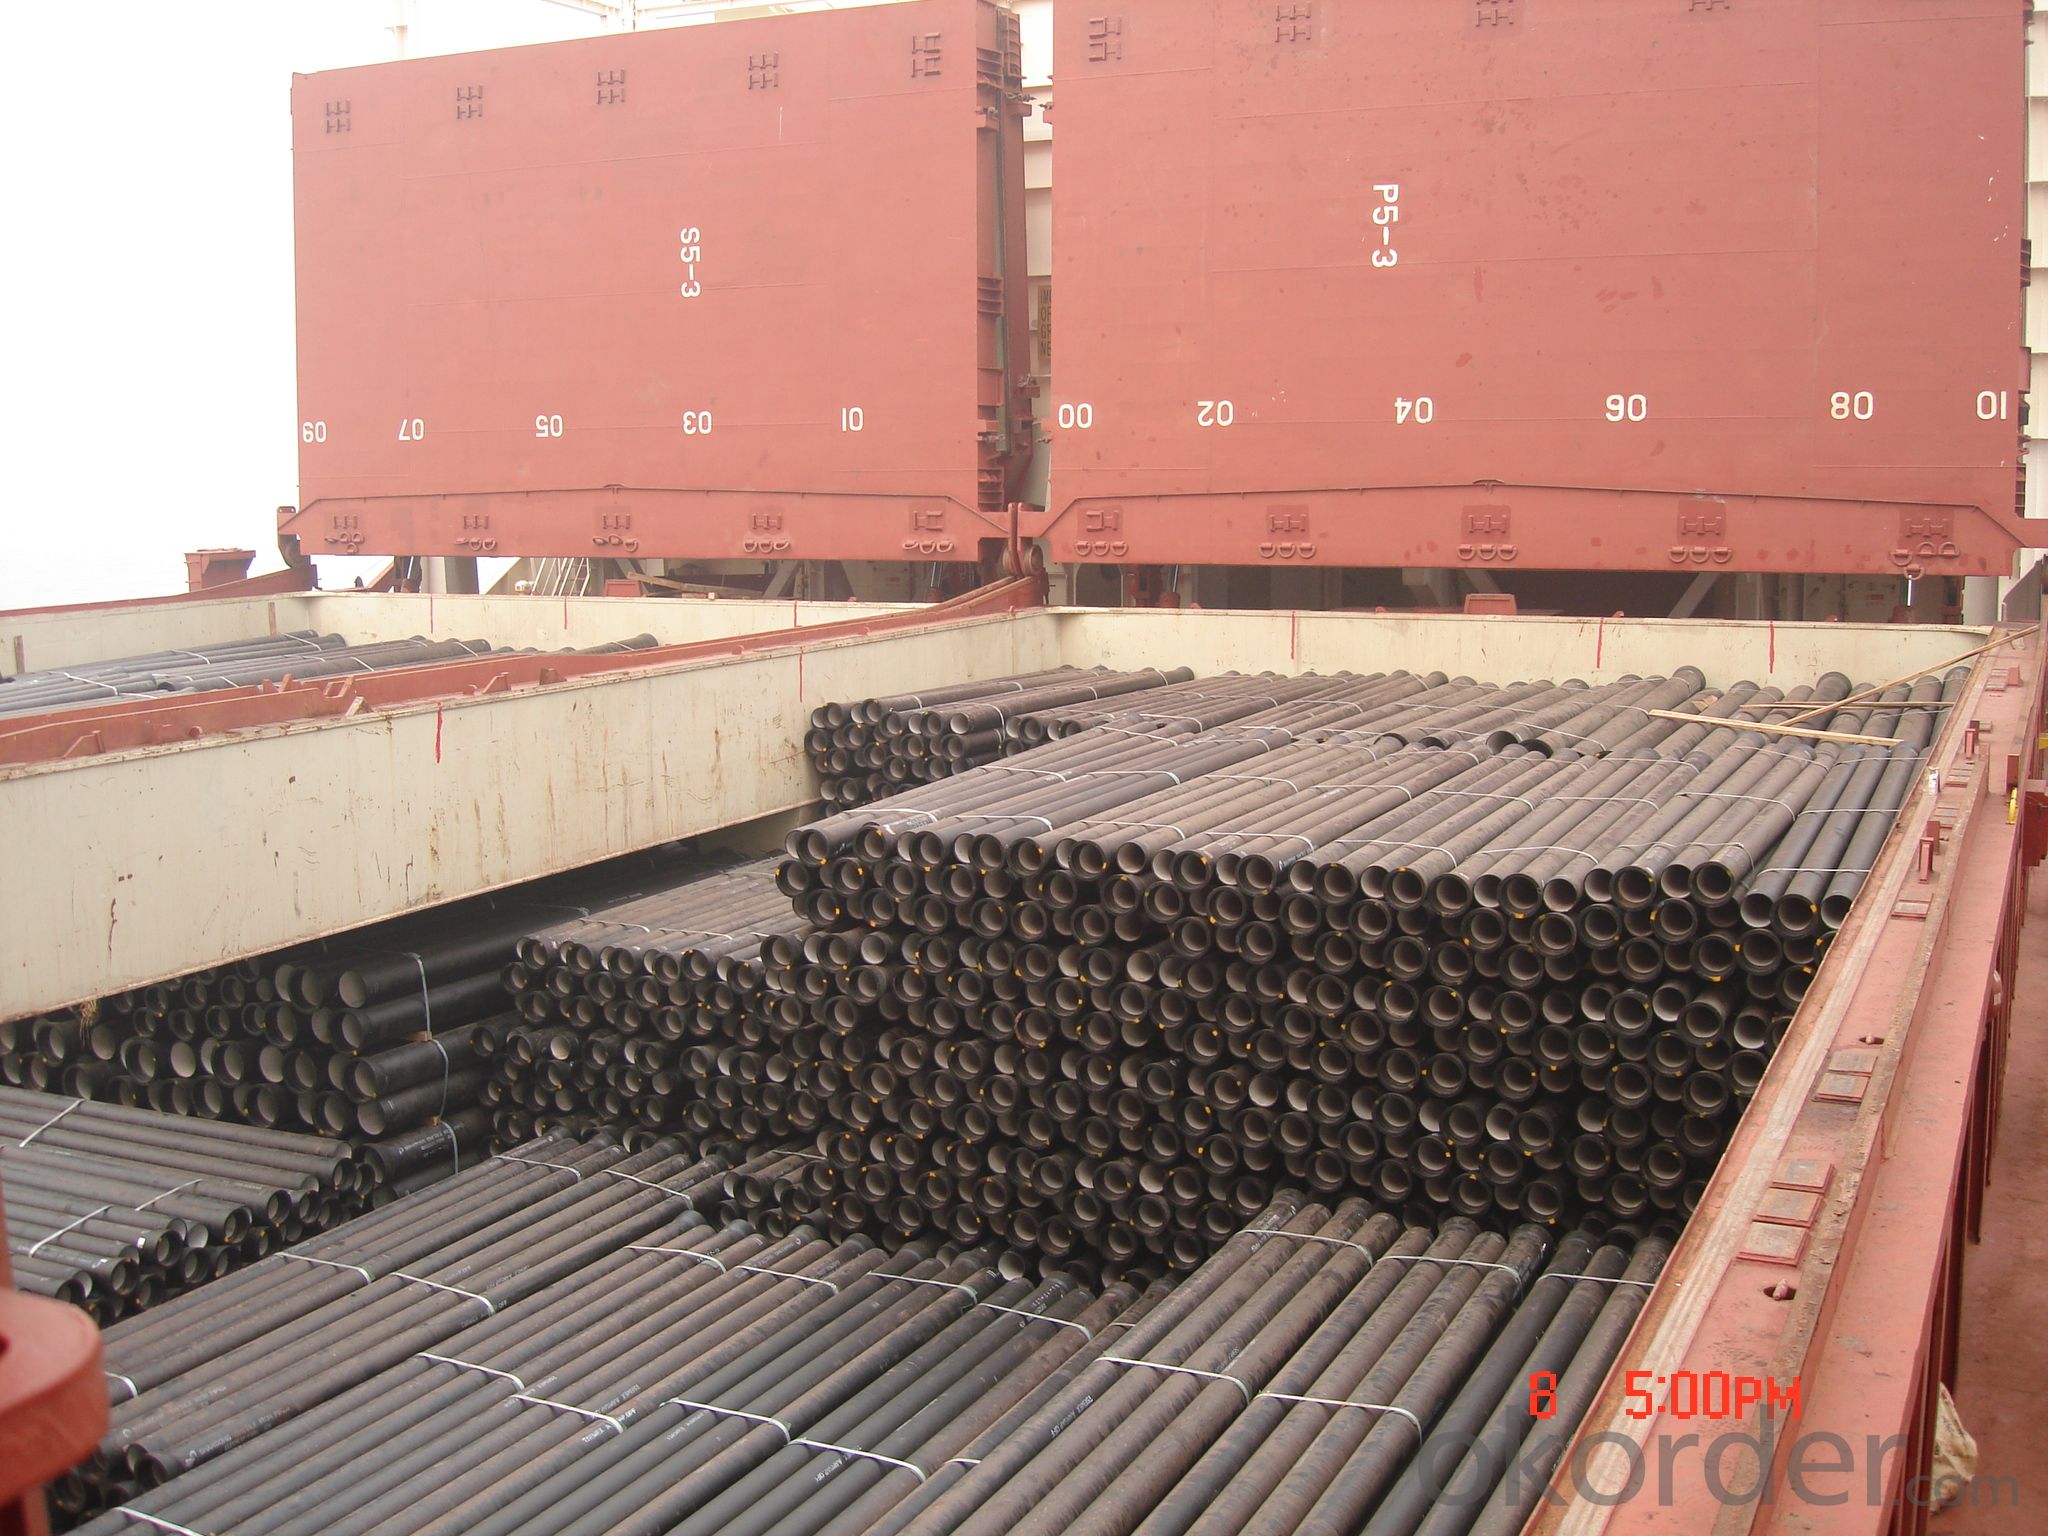 Ductile Iron Pipe ISO2531:1998 C CLASS DN100 real-time quotes, last